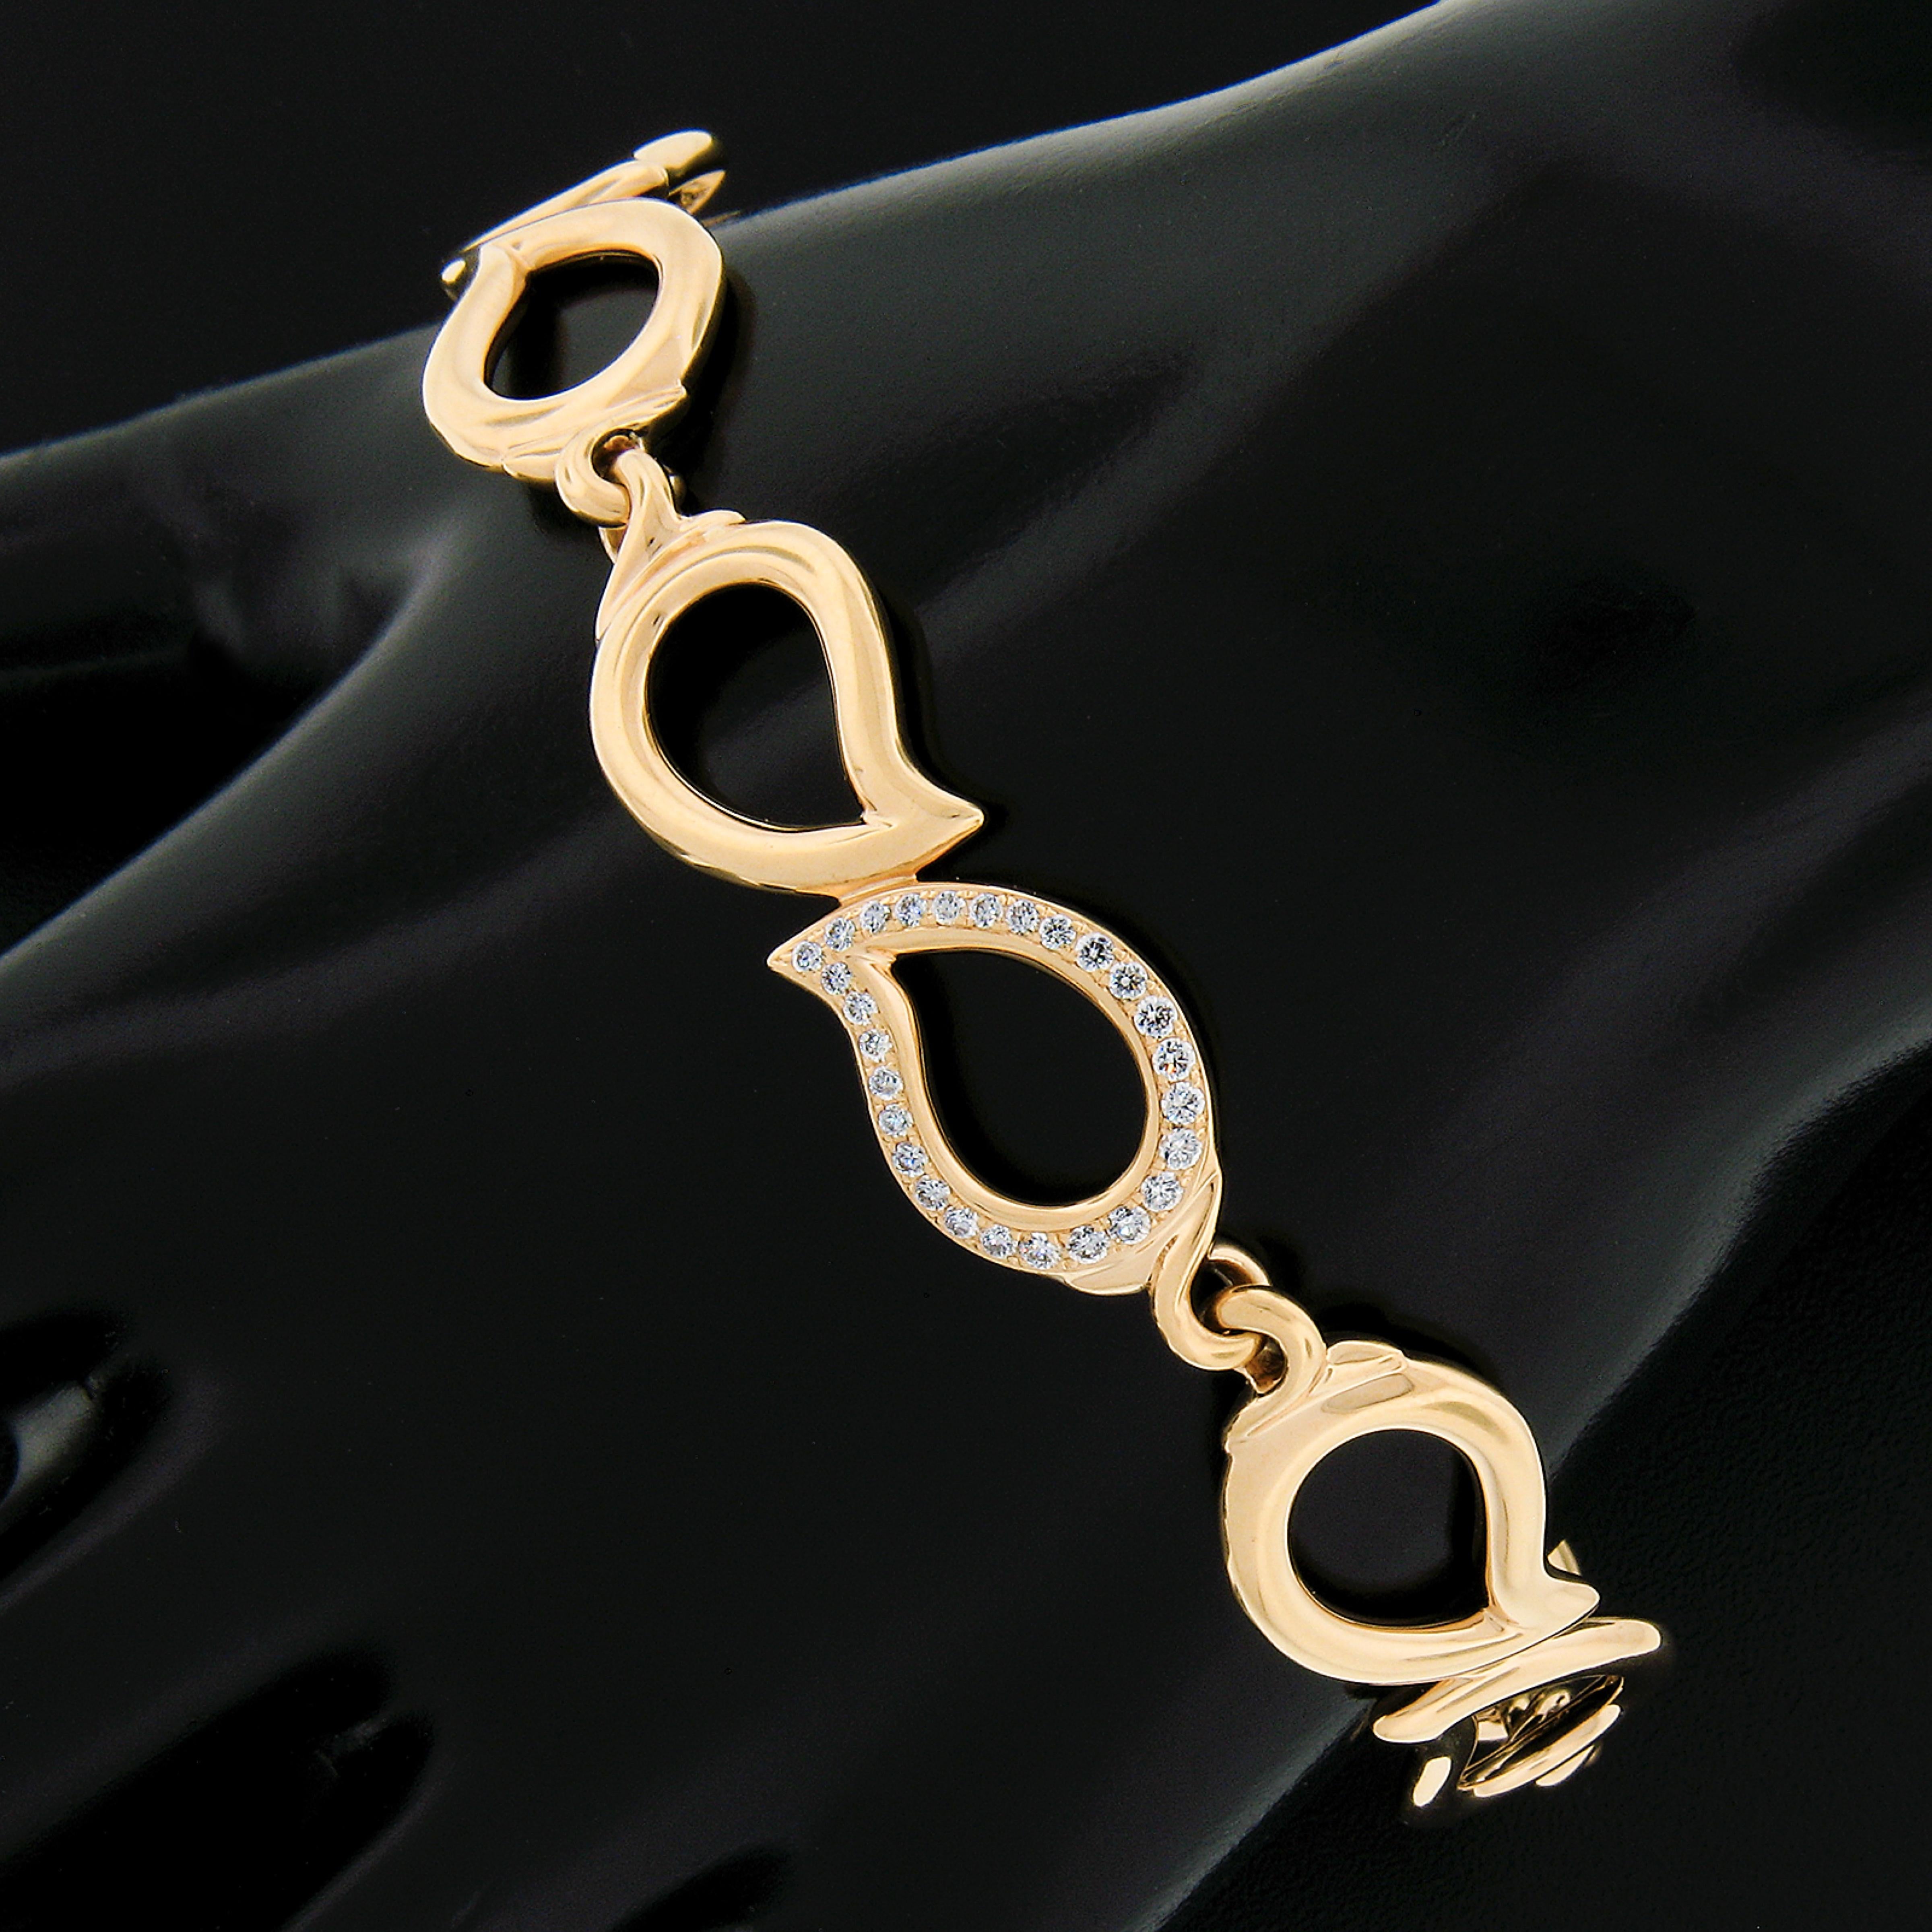 You are looking at a very lovely link bracelet by Tamara Comolli crafted in solid 18k rosy yellow gold. This bracelet features open work leaf links that are high polished with the center leaf being adorned with 0.31 carats of the finest quality